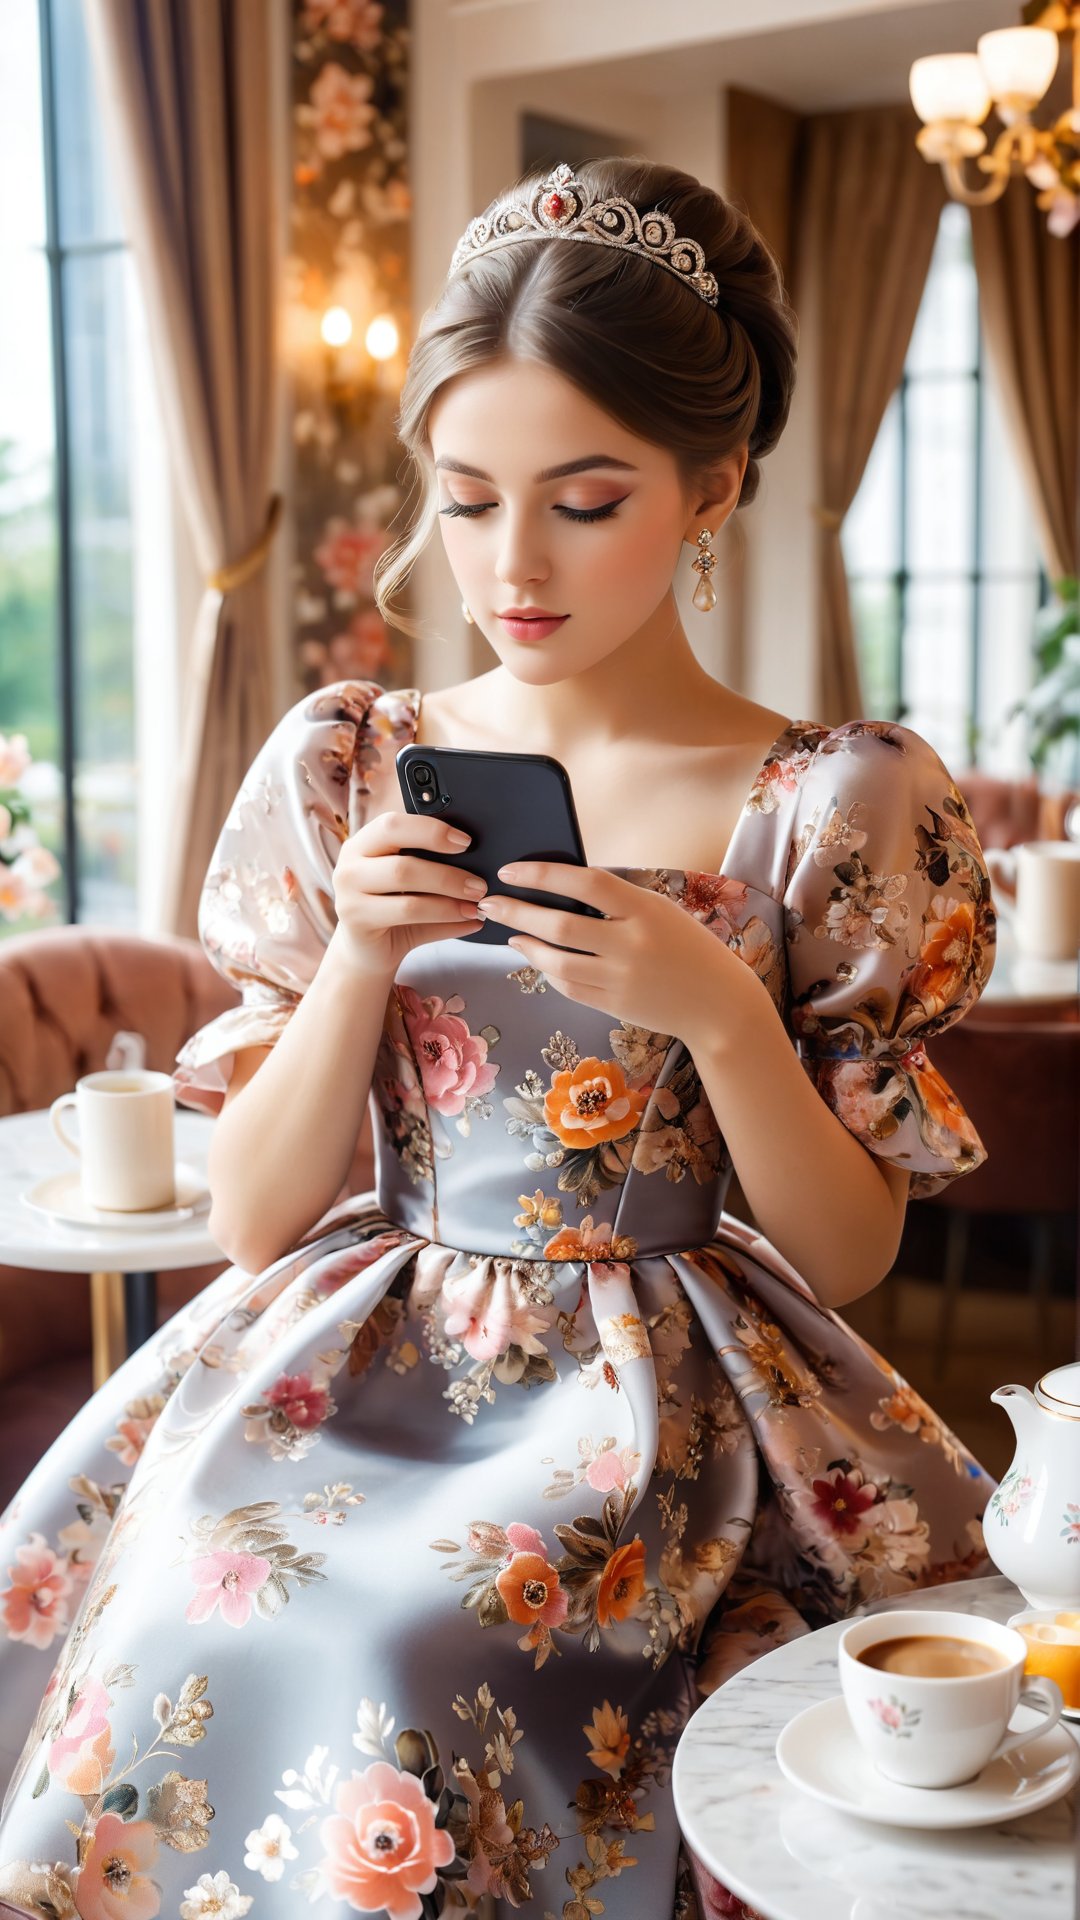 Flowers bloom style, A stunning portrait photograph of a young princess enjoying her morning coffee. The princess is dressed in a chic and elegant outfit, with a beautiful floral pattern on the dress. She holds a steaming cup of coffee with her left hand, and in her right hand, she has a smartphone, possibly to capture the perfect #OOTD moment. The background is tastefully blurred, highlighting the princess and her morning ritual., portrait photography, fashion, photo, depth of field.